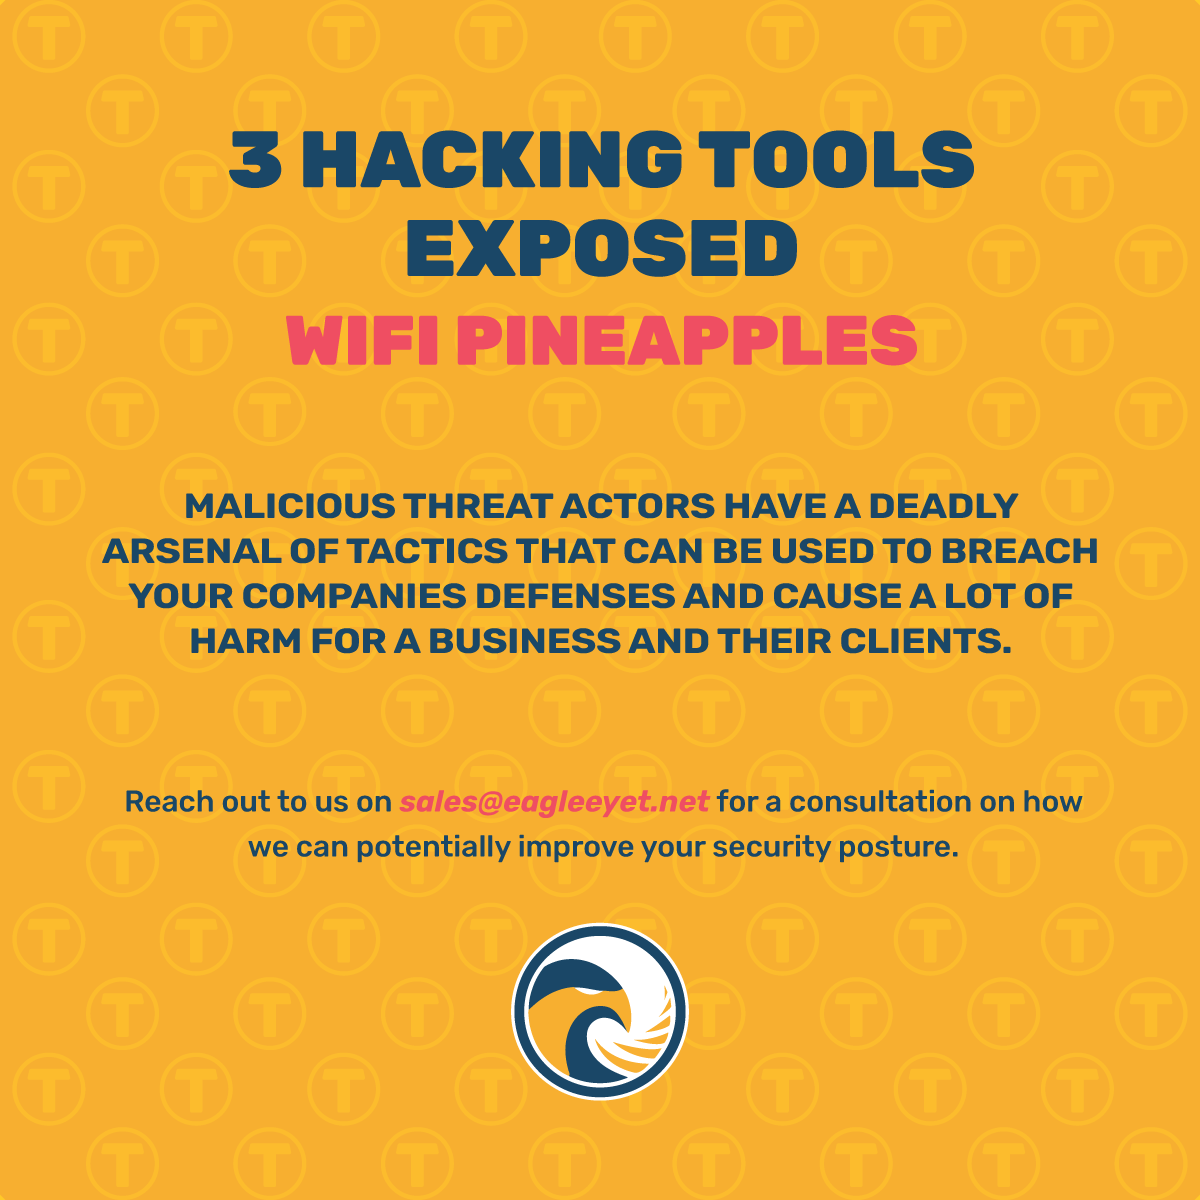 3 Hacking Tools Exposed